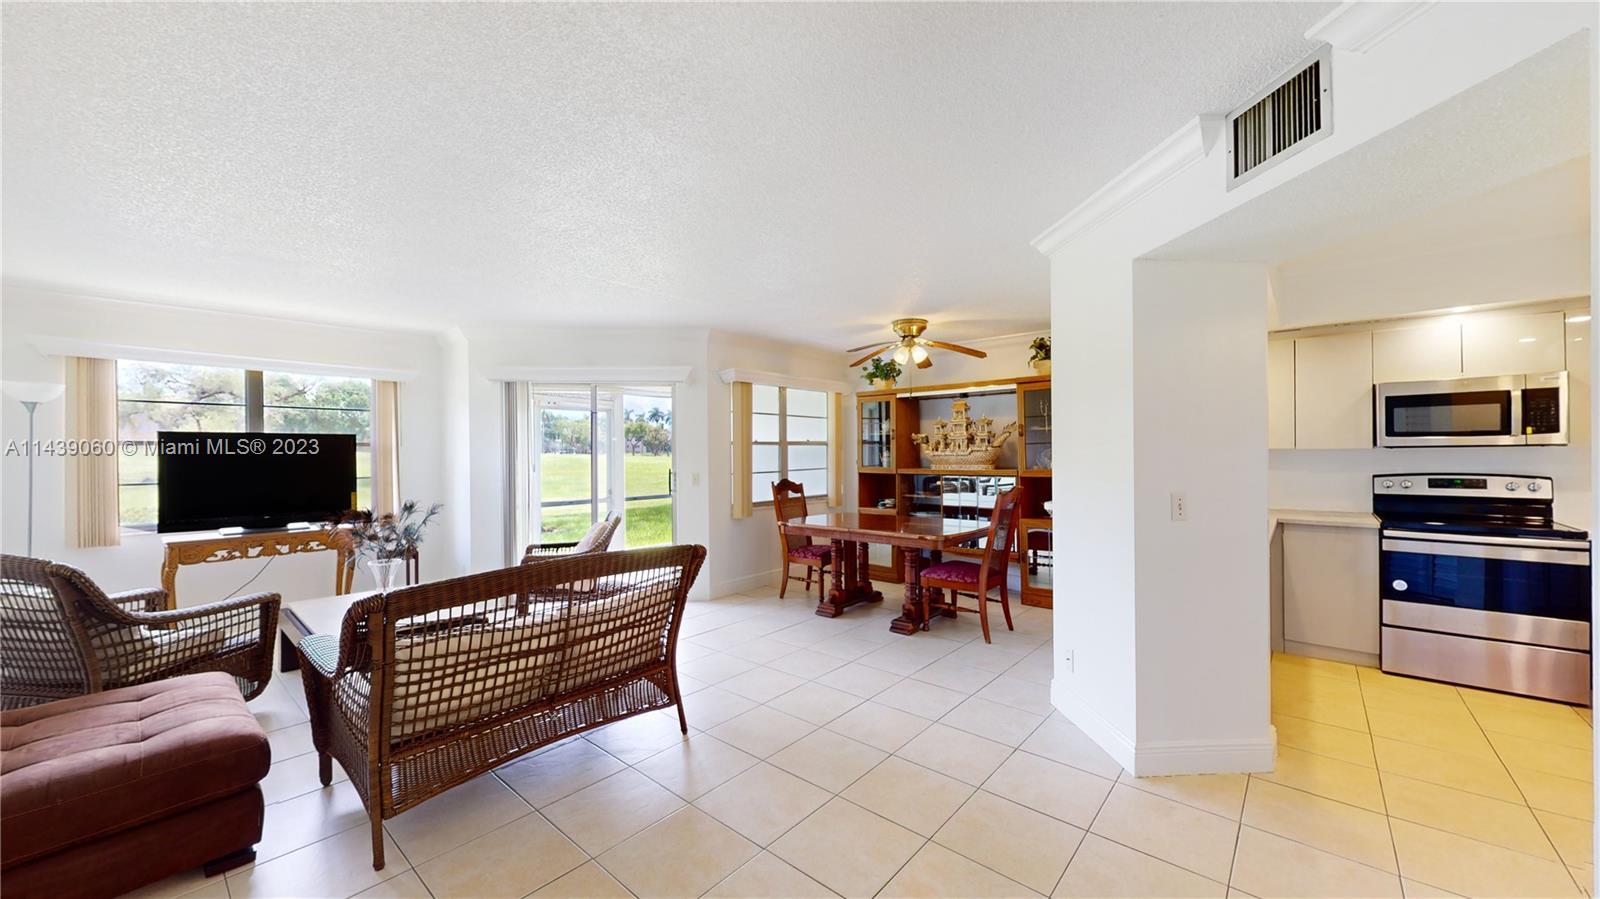 Photo of 701 SW 128 Th Ave #F104 in Pembroke Pines, FL